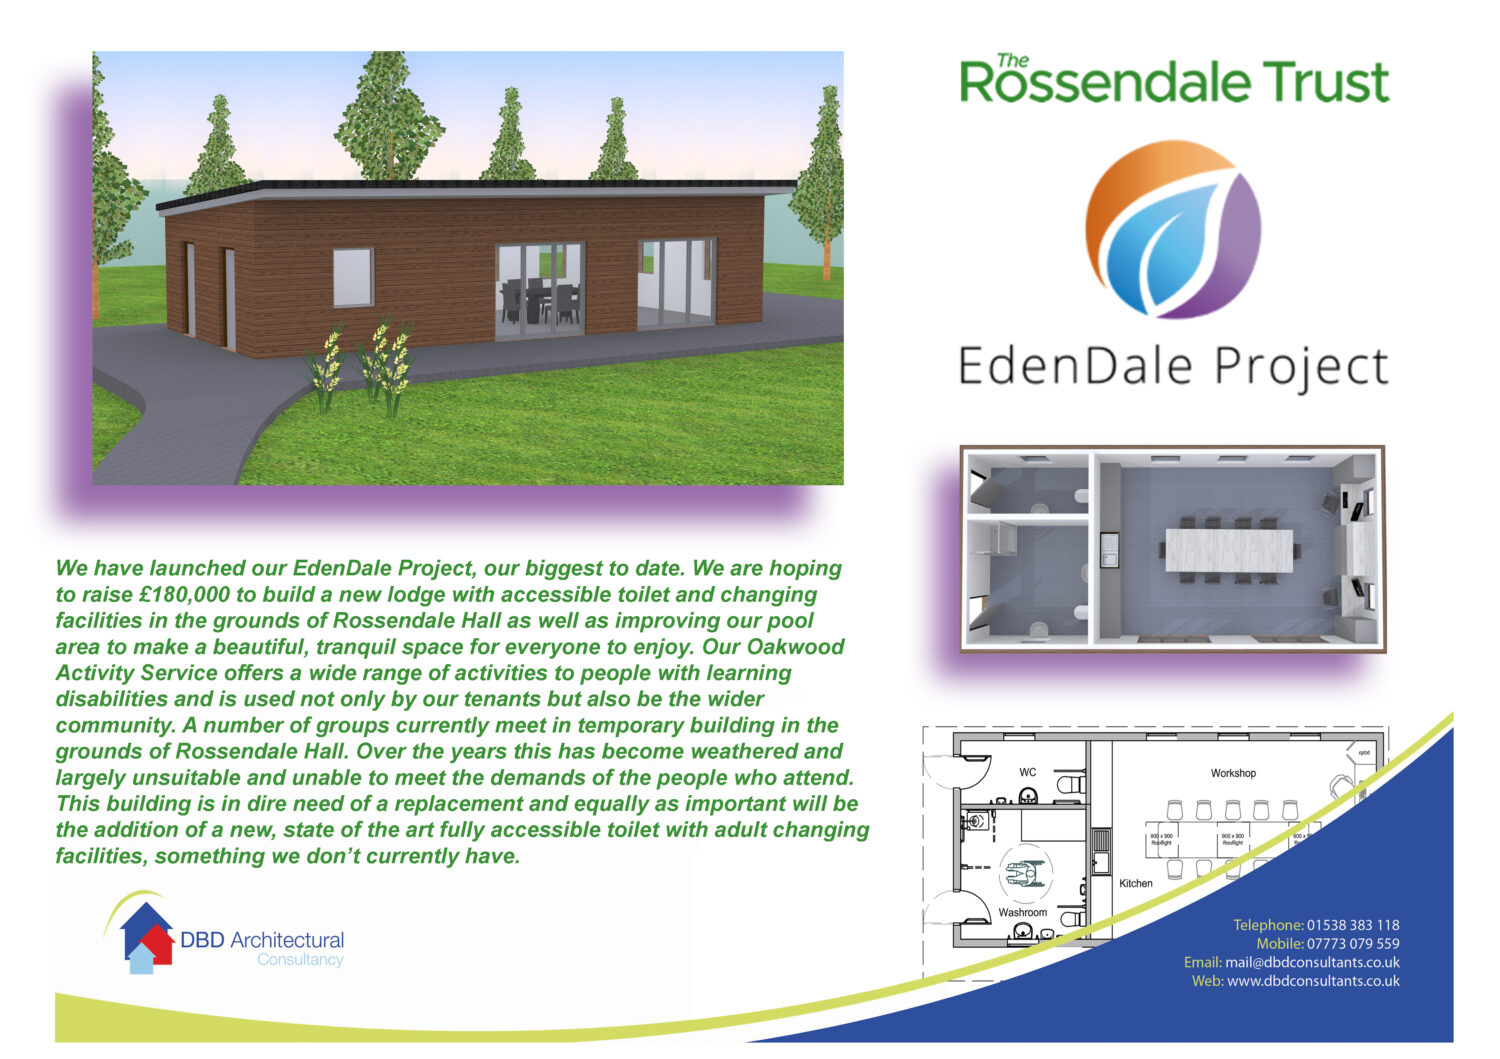 The EdenDale Project